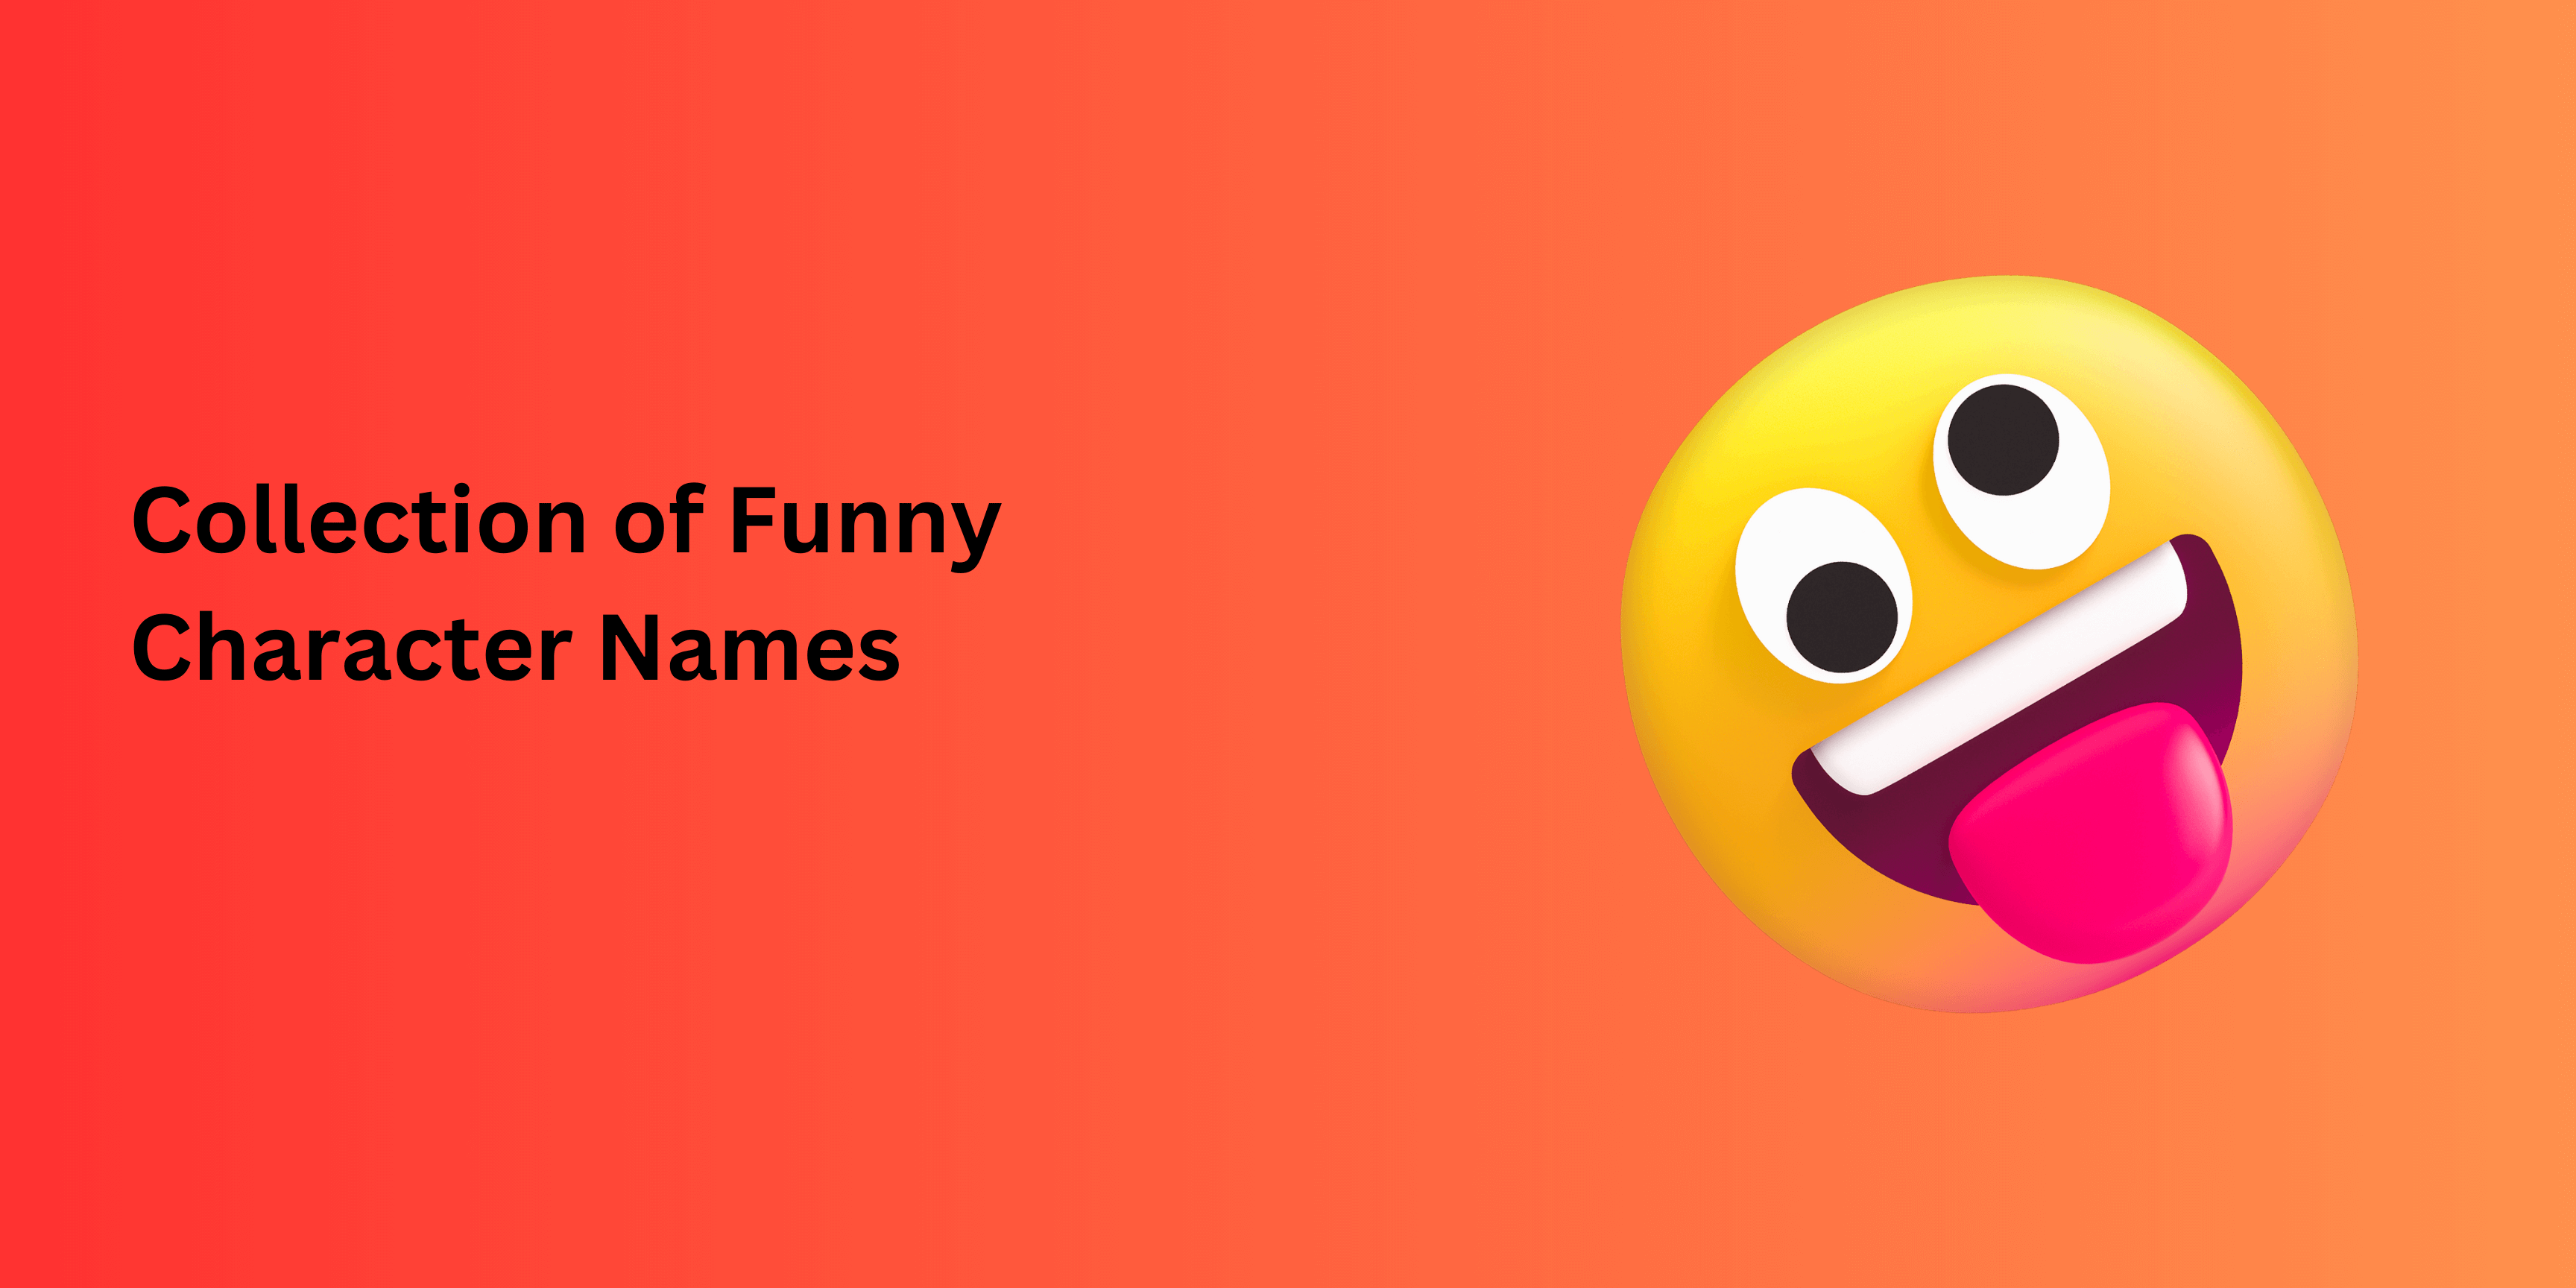 Collection of Funny Character Names